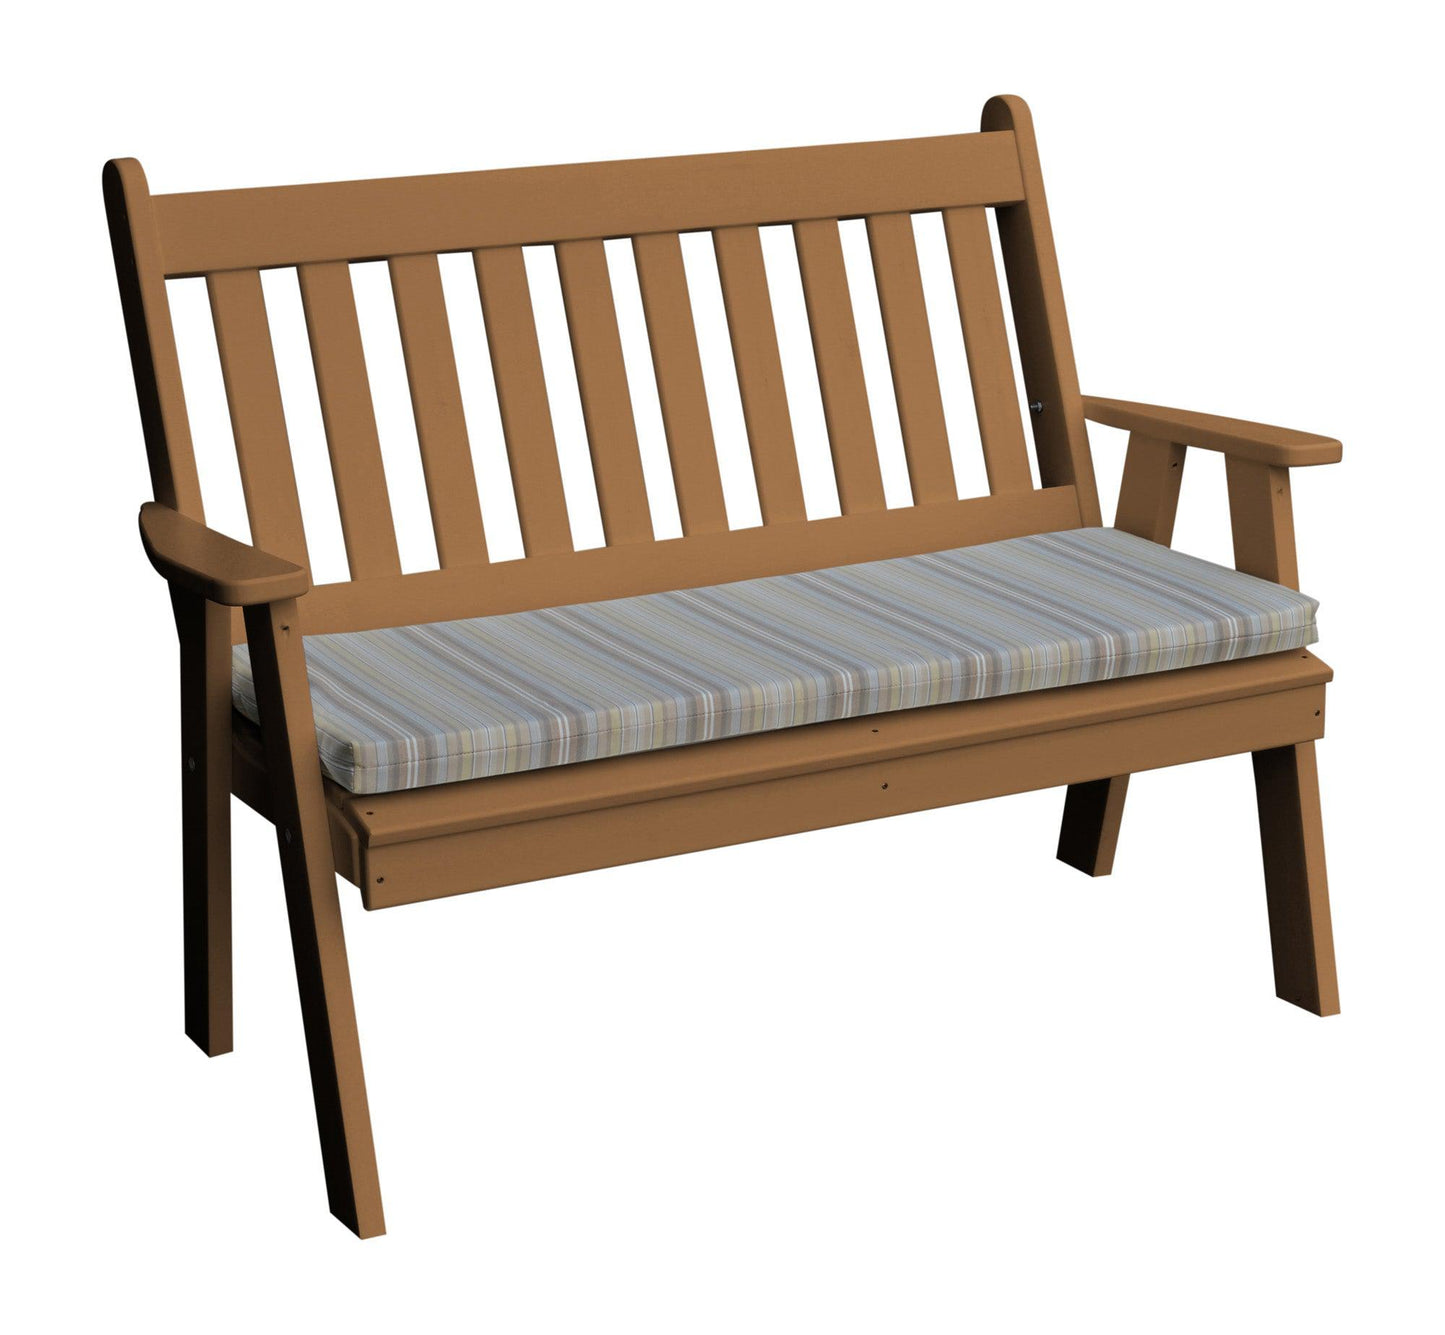 A&L Furniture Company Recycled Plastic 4' Traditional English Garden Bench - LEAD TIME TO SHIP 10 BUSINESS DAYS